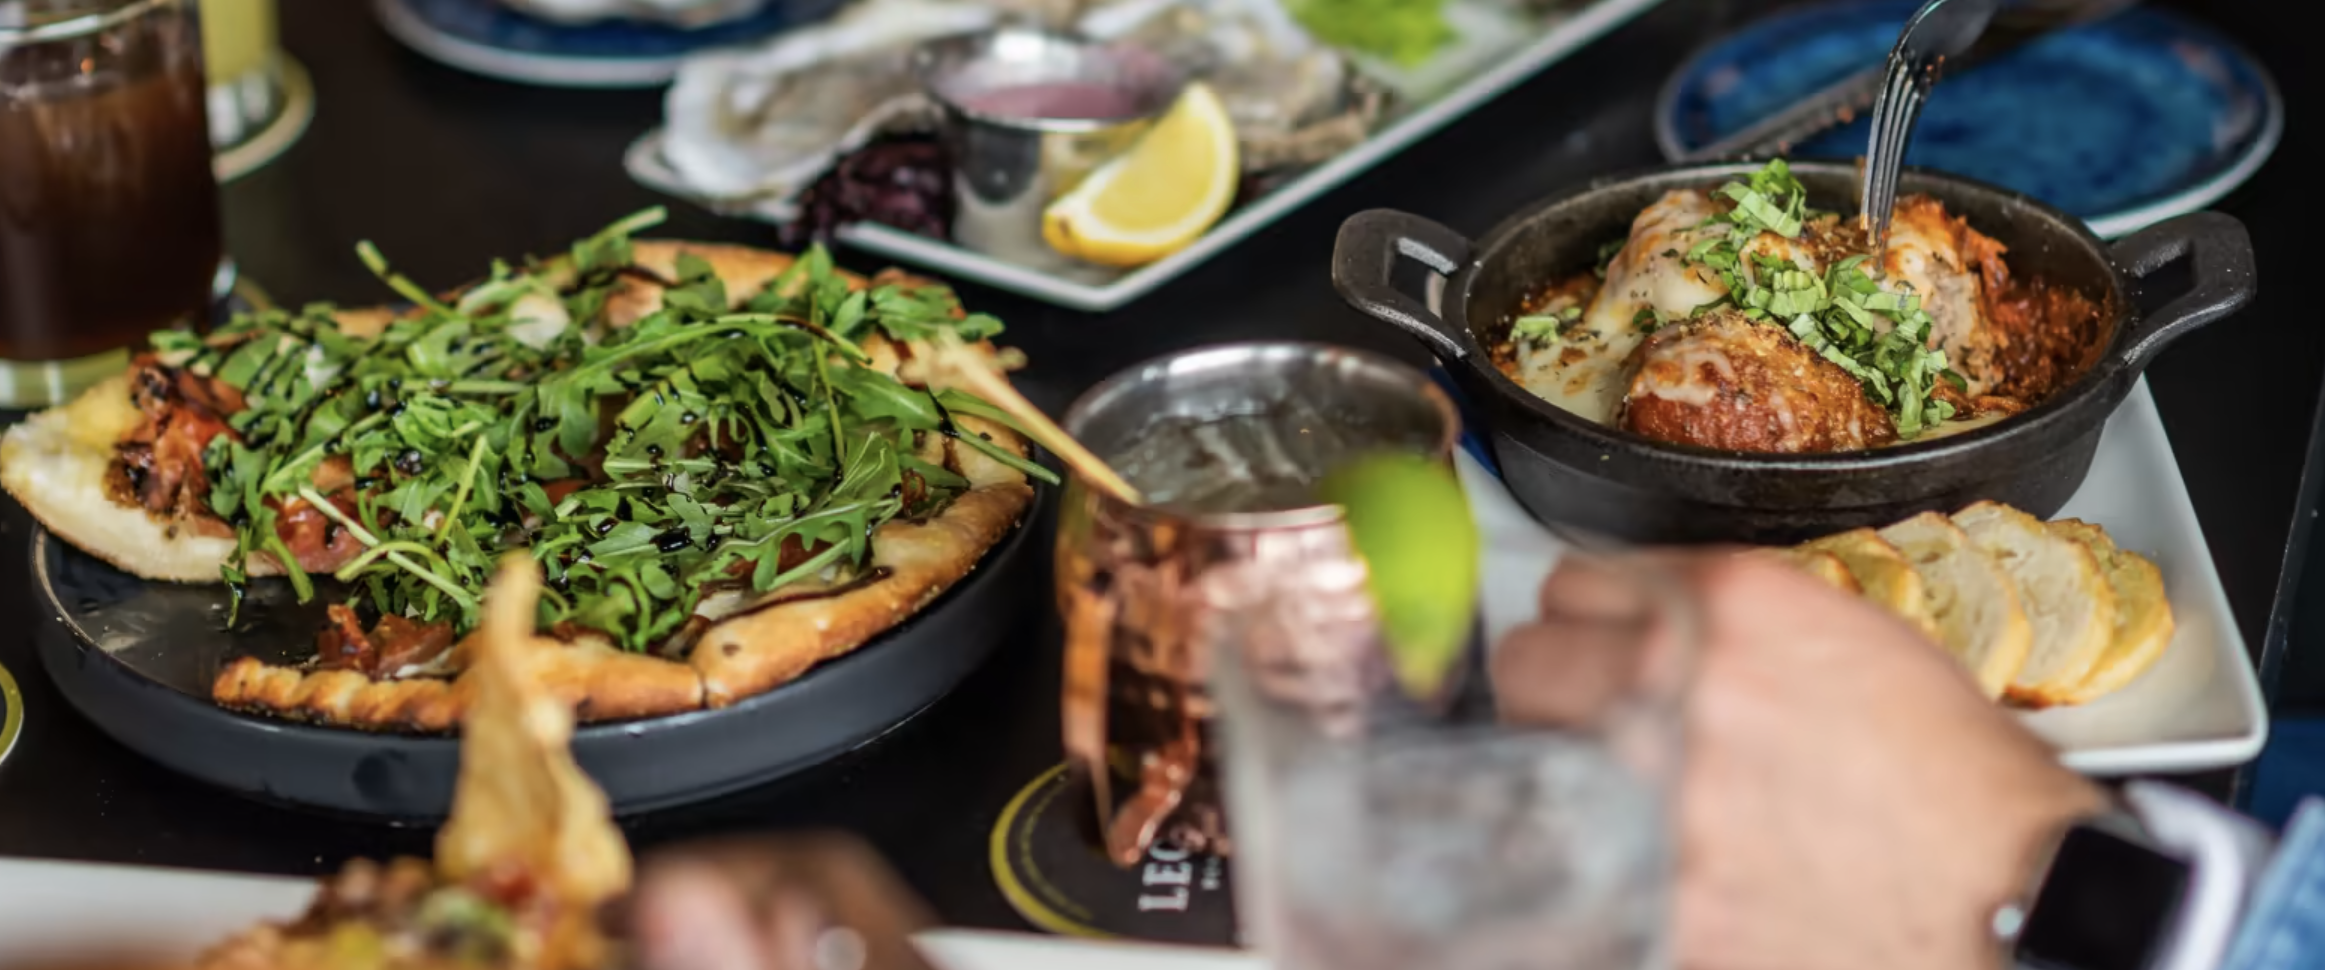 A table with moscow mule cups, pizza and meatballs in a skillet